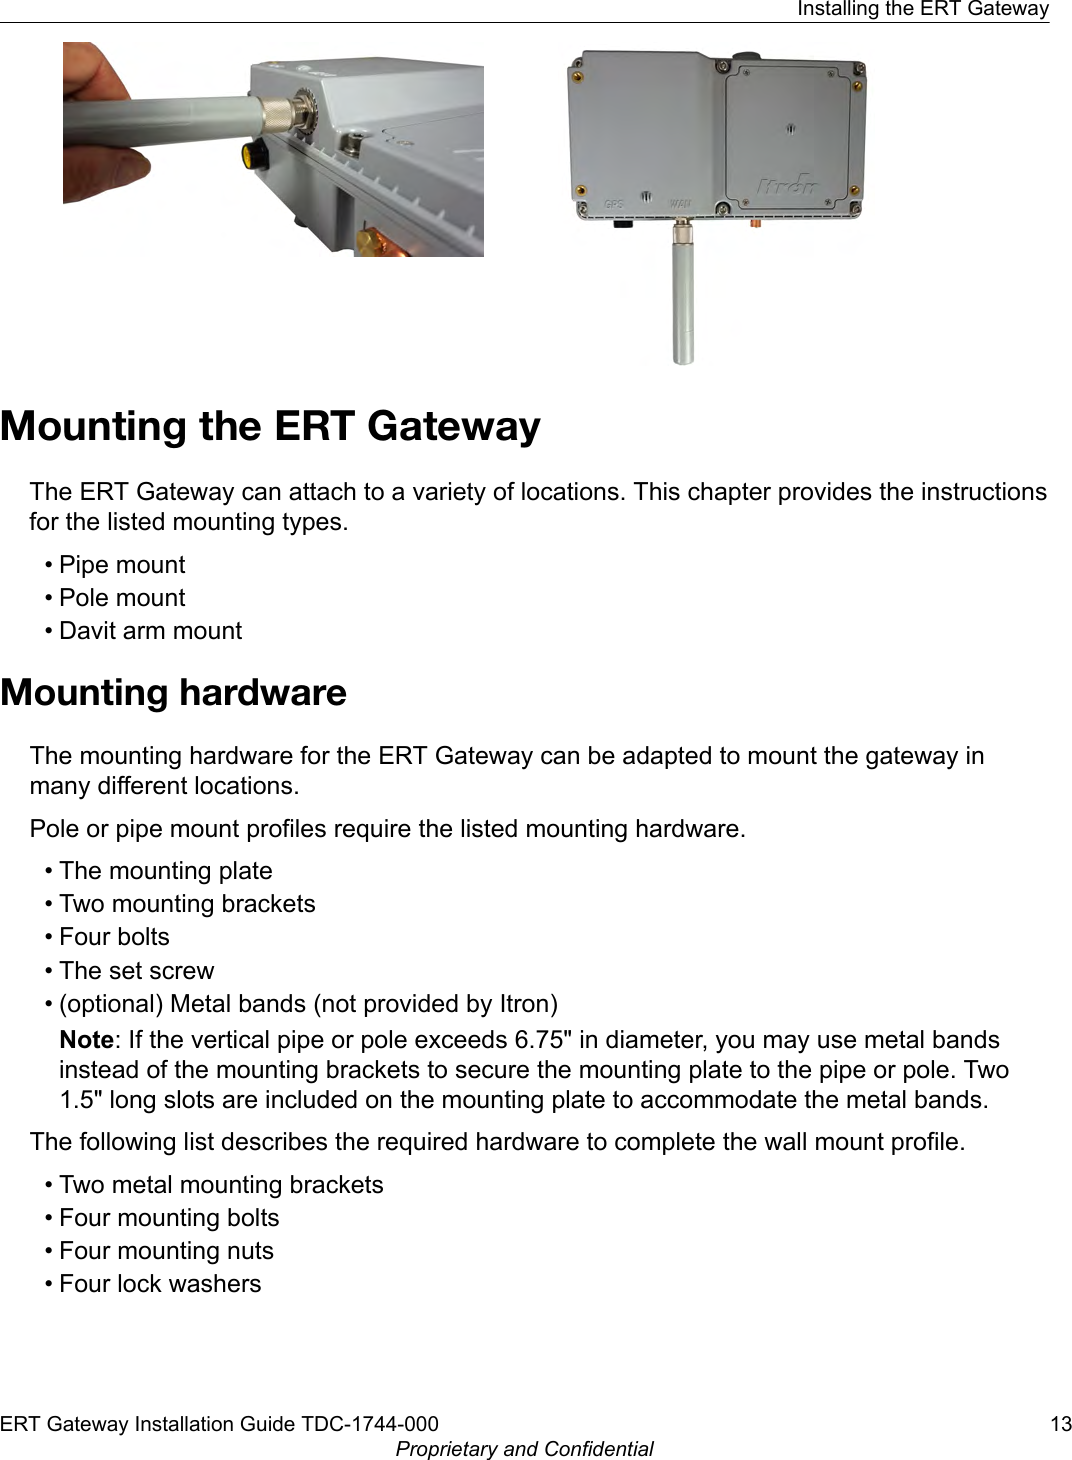 Mounting the ERT GatewayThe ERT Gateway can attach to a variety of locations. This chapter provides the instructionsfor the listed mounting types.• Pipe mount• Pole mount• Davit arm mountMounting hardwareThe mounting hardware for the ERT Gateway can be adapted to mount the gateway inmany different locations.Pole or pipe mount profiles require the listed mounting hardware.• The mounting plate• Two mounting brackets• Four bolts• The set screw• (optional) Metal bands (not provided by Itron)Note: If the vertical pipe or pole exceeds 6.75&quot; in diameter, you may use metal bandsinstead of the mounting brackets to secure the mounting plate to the pipe or pole. Two1.5&quot; long slots are included on the mounting plate to accommodate the metal bands.The following list describes the required hardware to complete the wall mount profile.• Two metal mounting brackets• Four mounting bolts• Four mounting nuts• Four lock washersInstalling the ERT GatewayERT Gateway Installation Guide TDC-1744-000 13Proprietary and Confidential